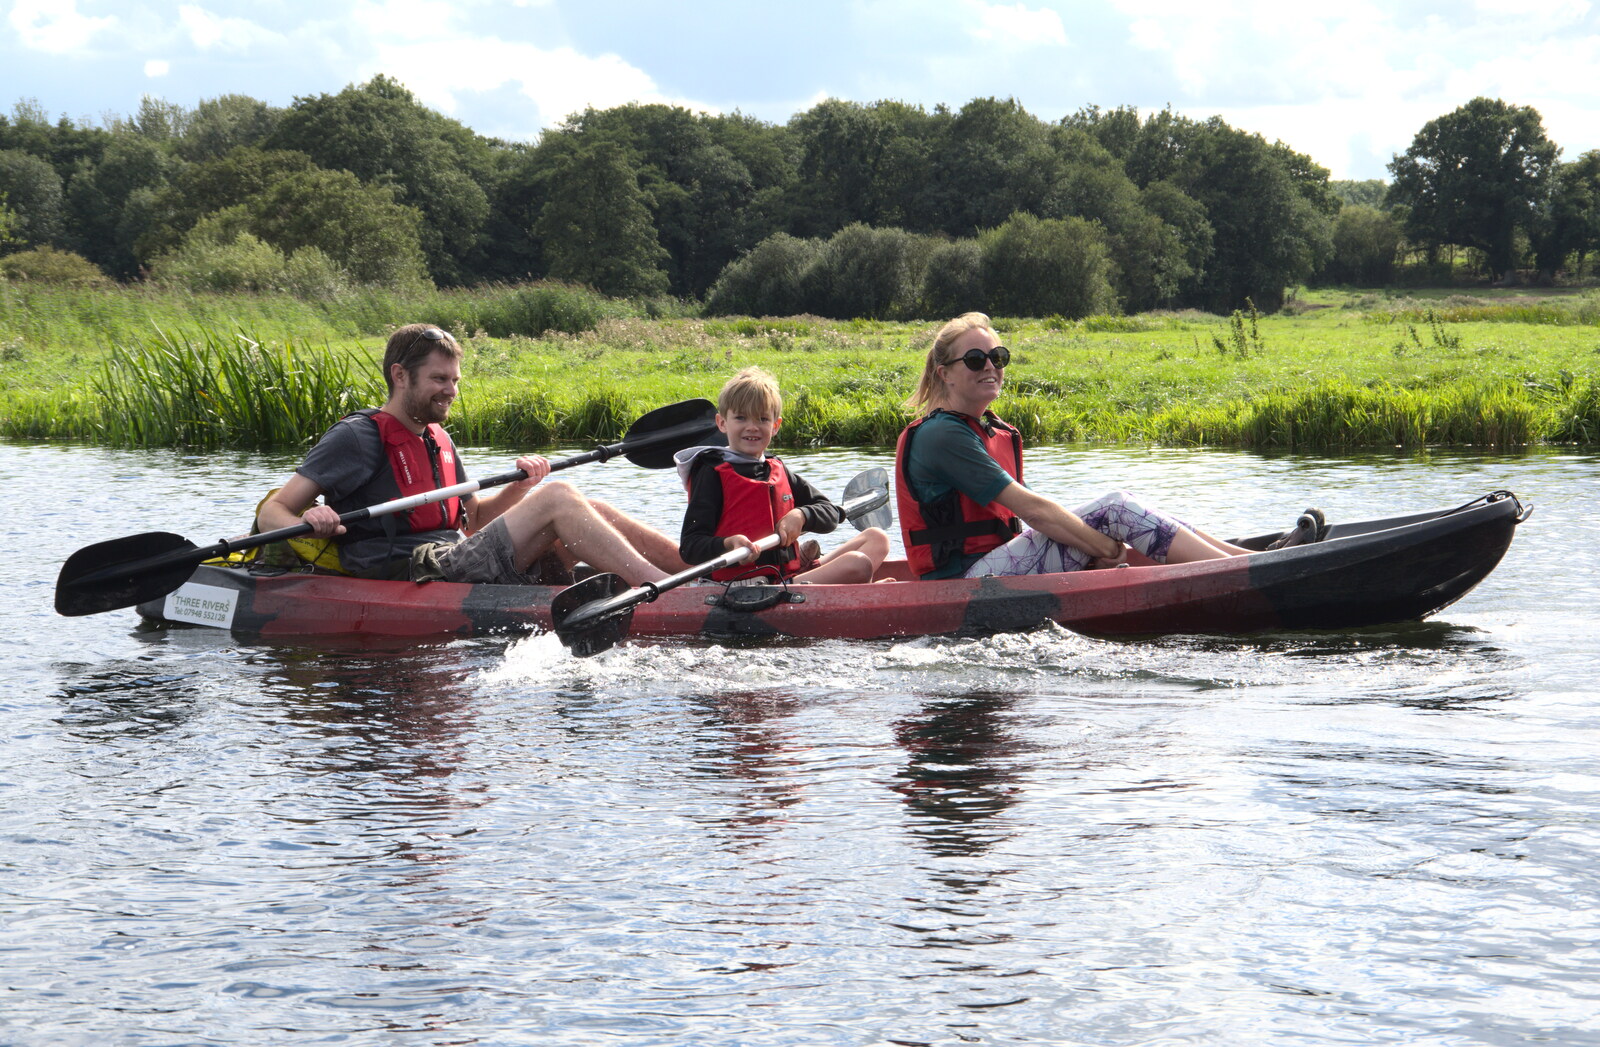 Camping at Three Rivers, Geldeston, Norfolk - 5th September 2020: The Boy Phil and Harry paddle around